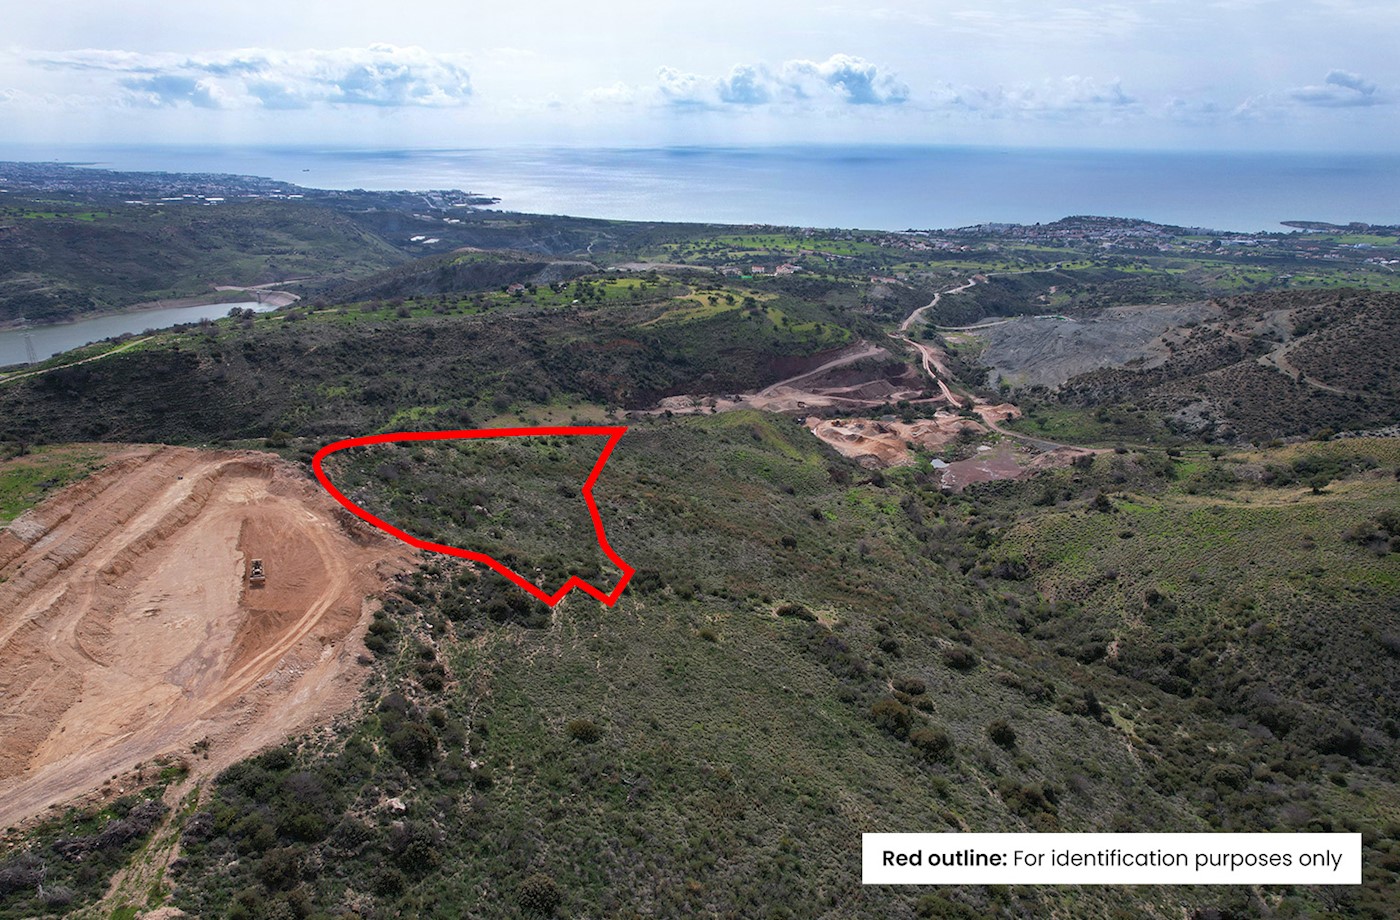 1/2 Share Agricultural Field in Pegeia, Paphos 1/5